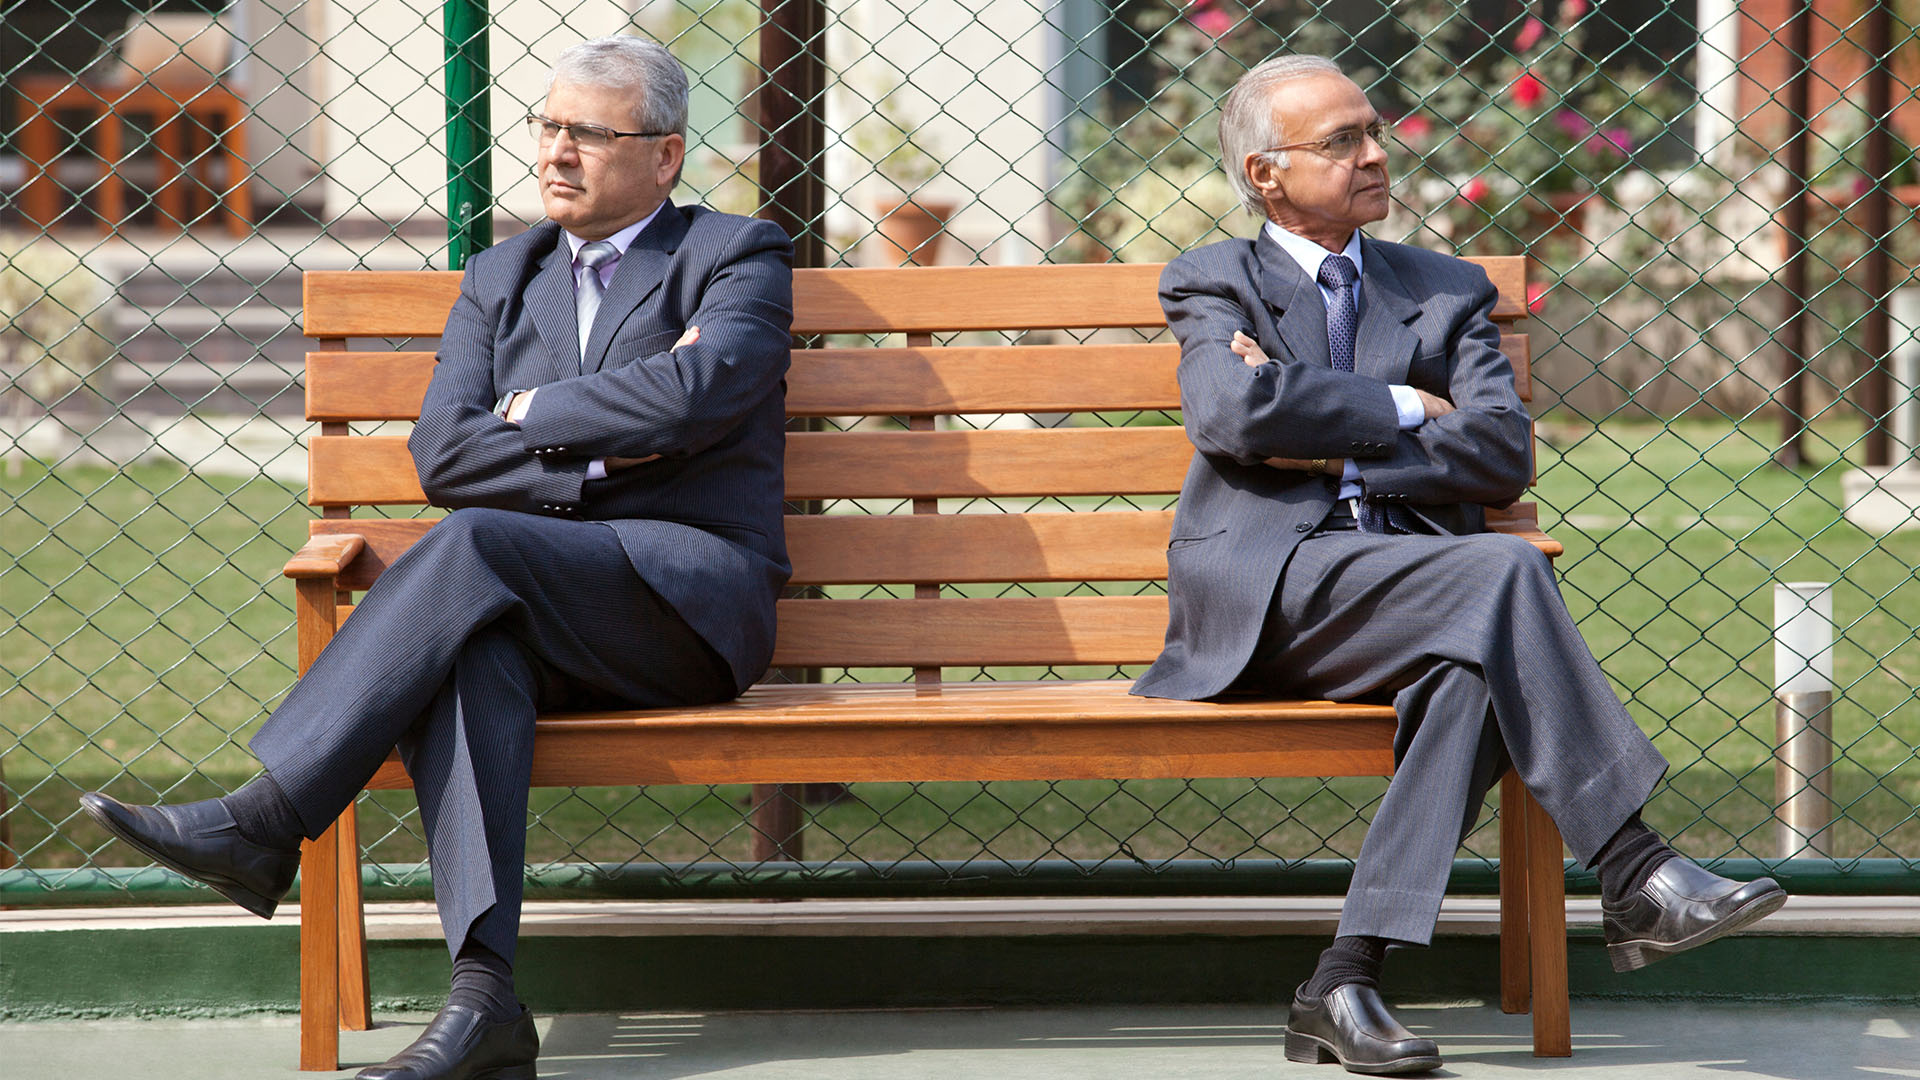 Two businessmen sit on bench, crossing their arms